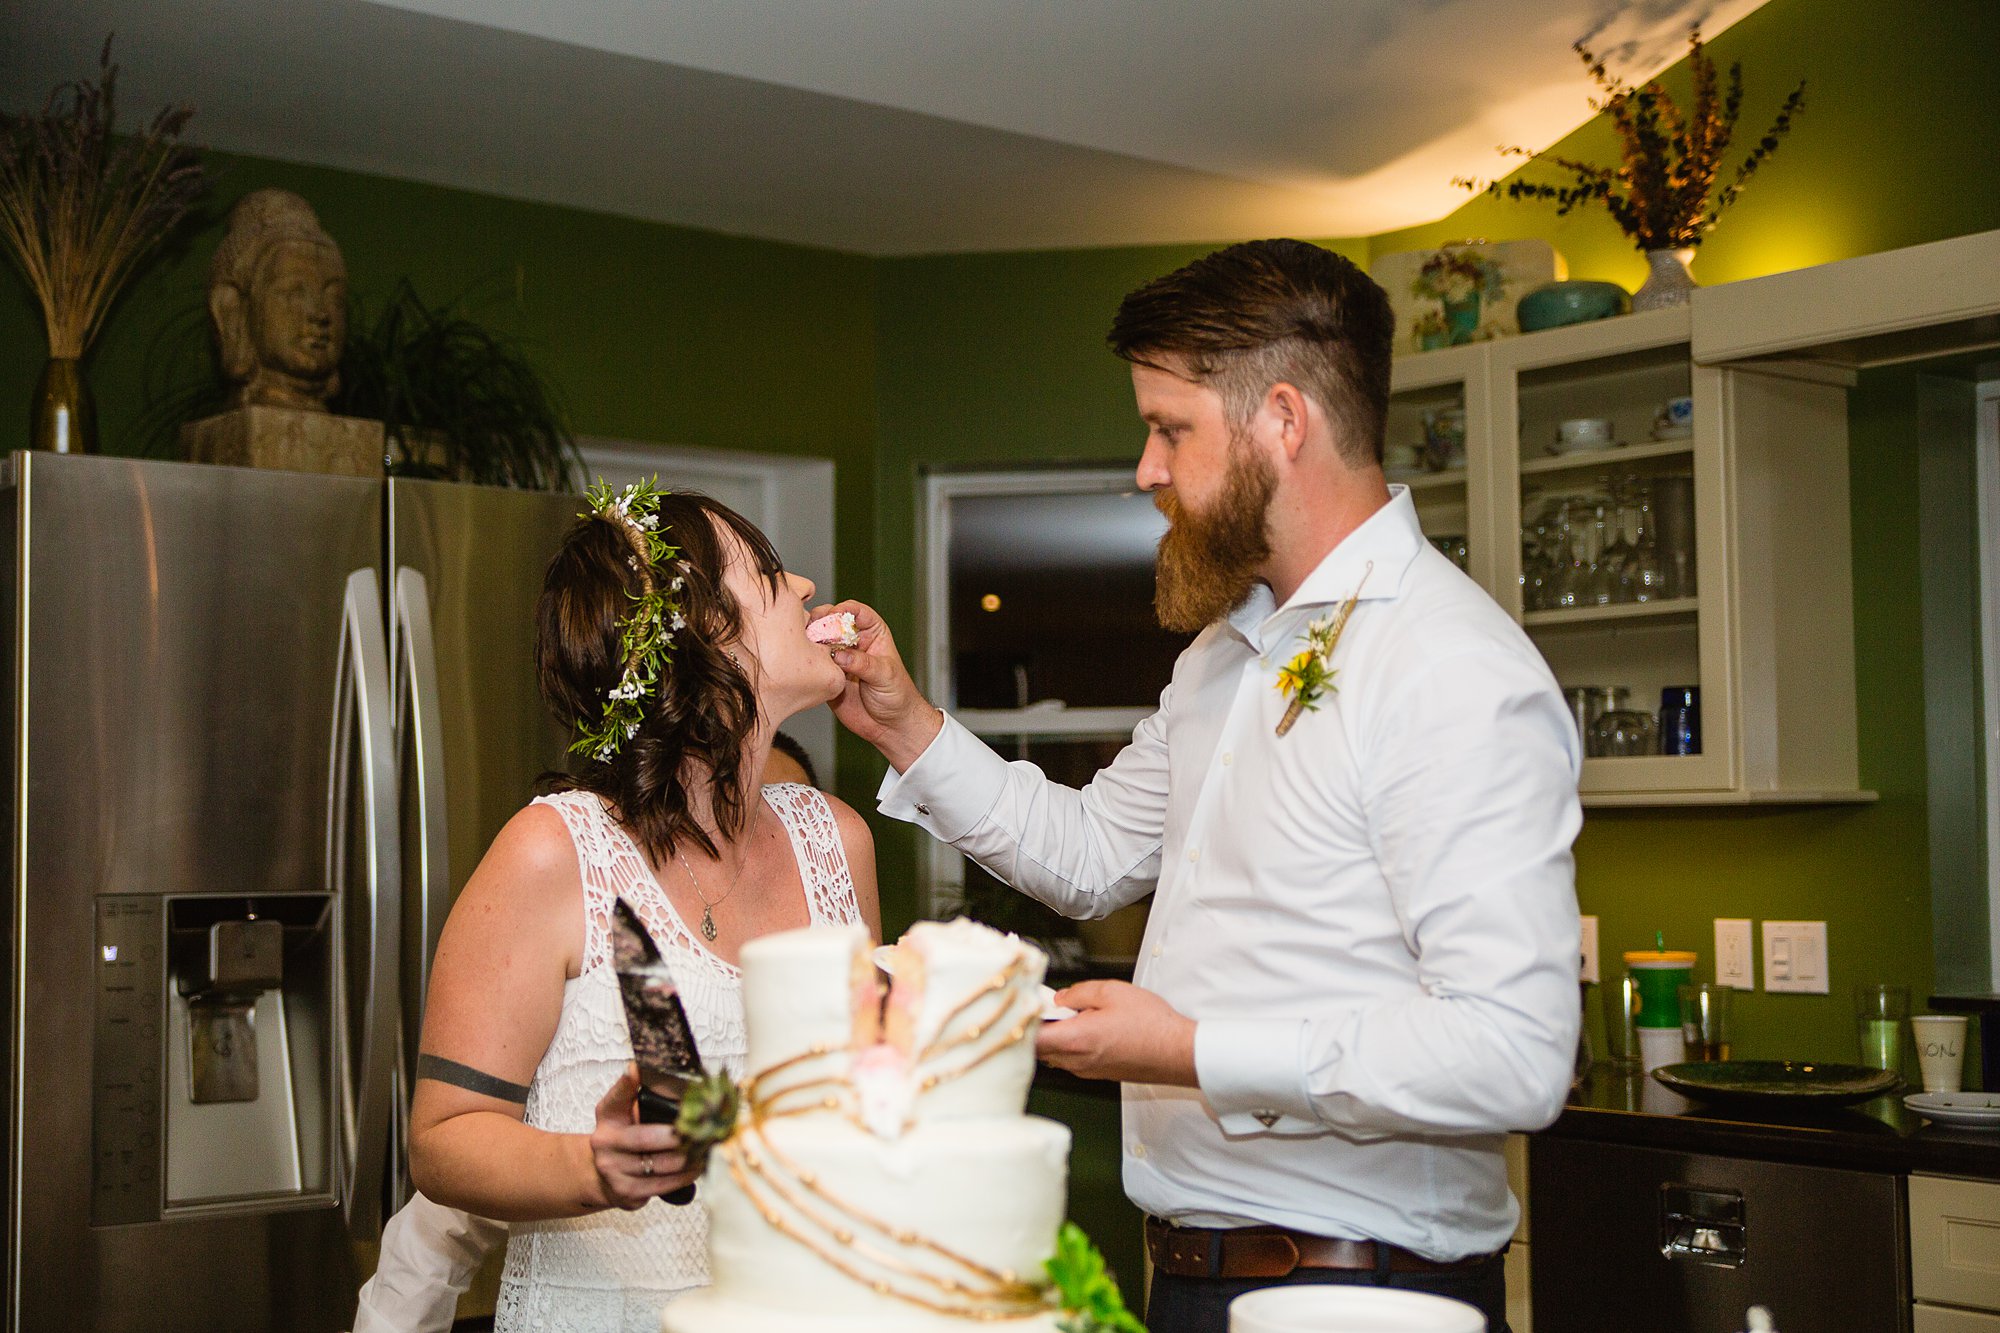 Bride and groom cutting the cake at their intimate backyard wedding by PMA Photography.